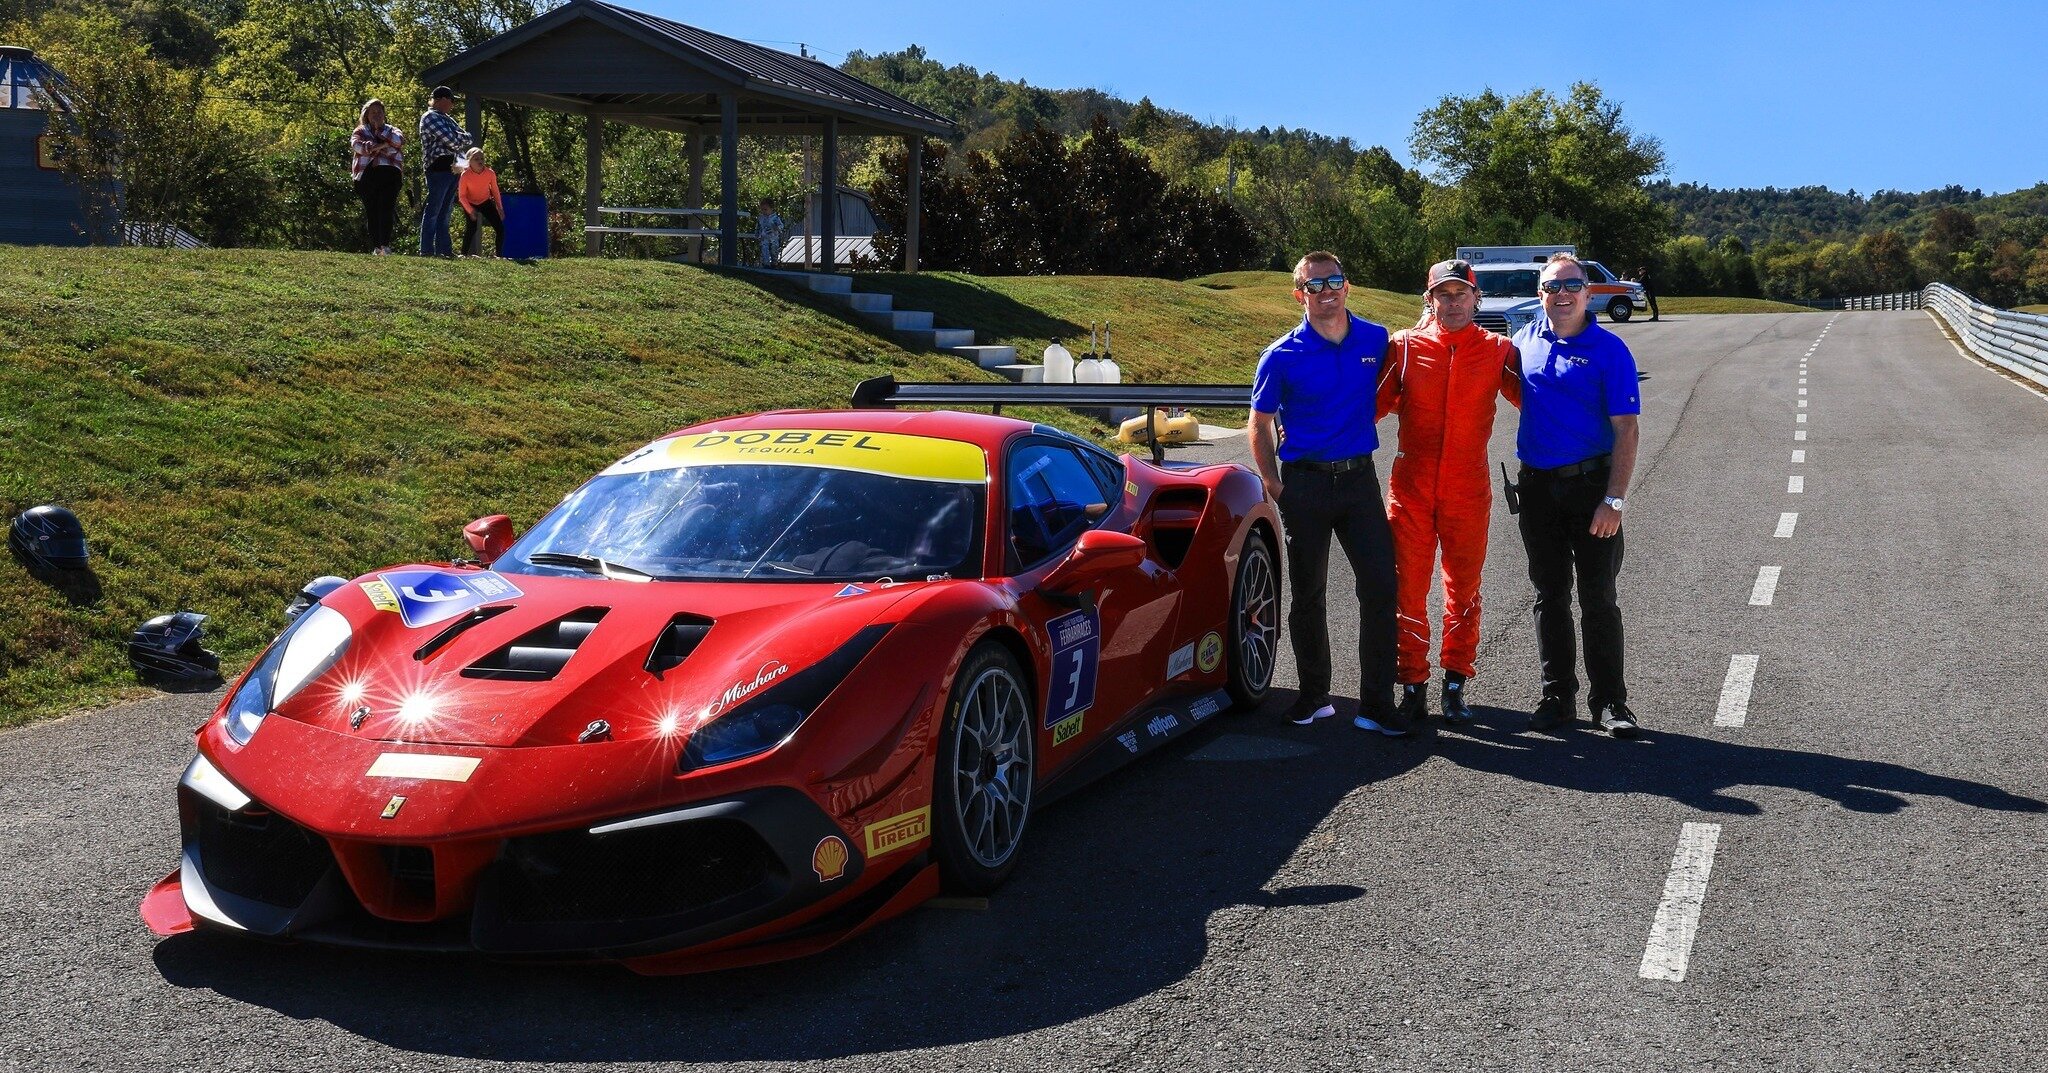 Saturday was perfect weather for the Inaugural Ferrari of Nashville Client Day at PTC! The car...what can we say but WOW!

Thank you to @phofnash  for choosing PTC, and @risicomp for bringing the Ferrari Challenge car for some hot laps! 

 #ferrarich